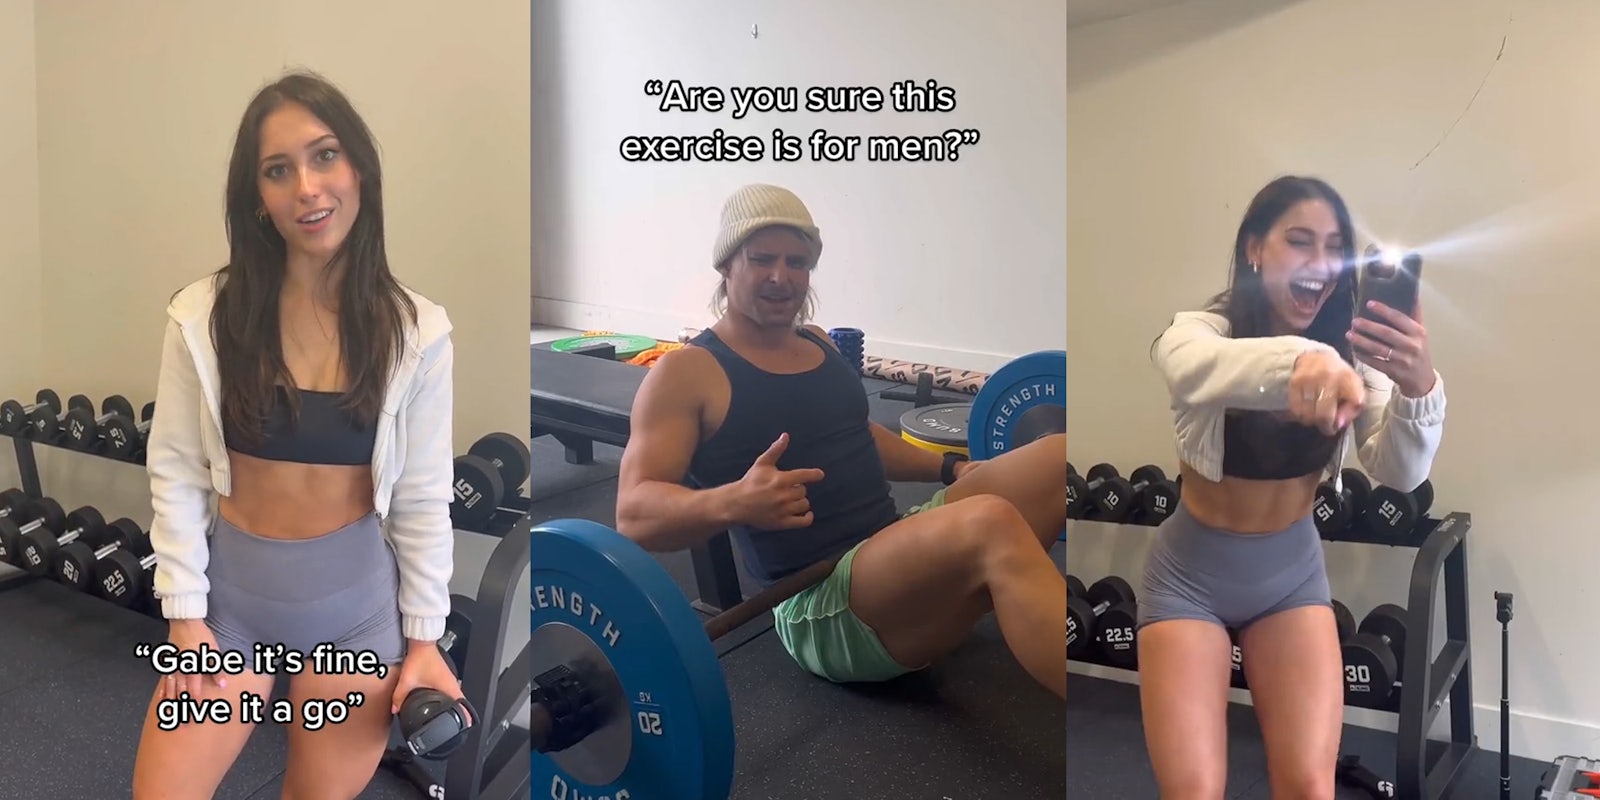 woman at gym with caption 'Gabe it's fine, give it a go' (l) man at gym with caption 'Are you sure this exercise is for men?' (c) woman laughing and recoding in gym (r)